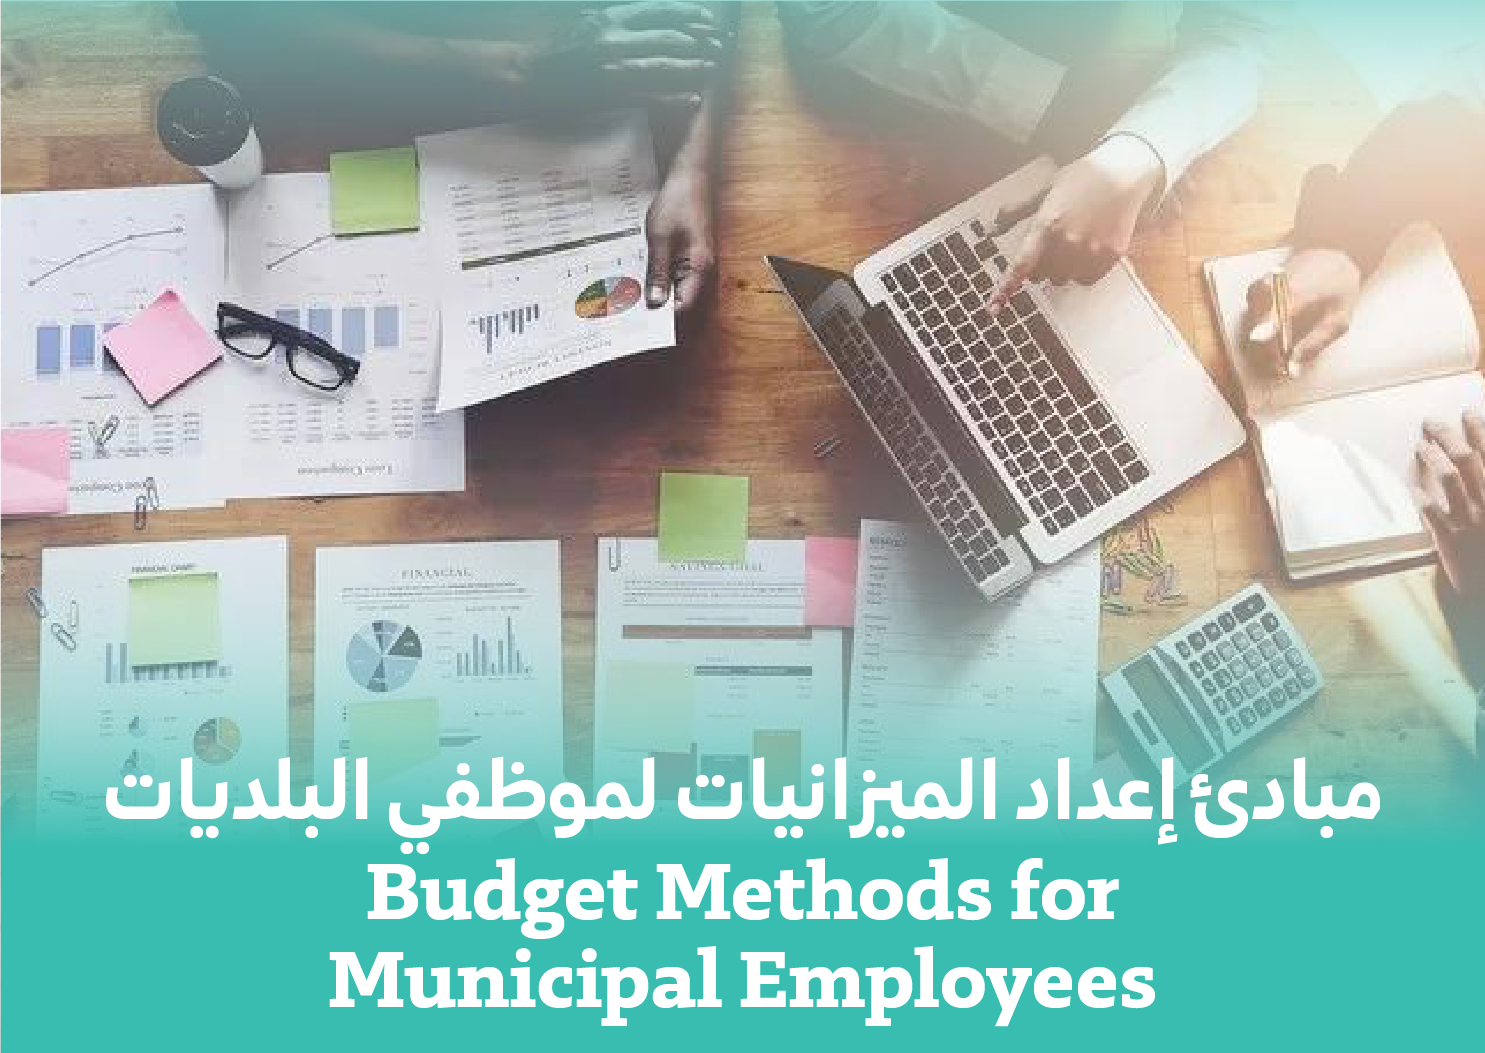 Budget Methods for Municipal Employees